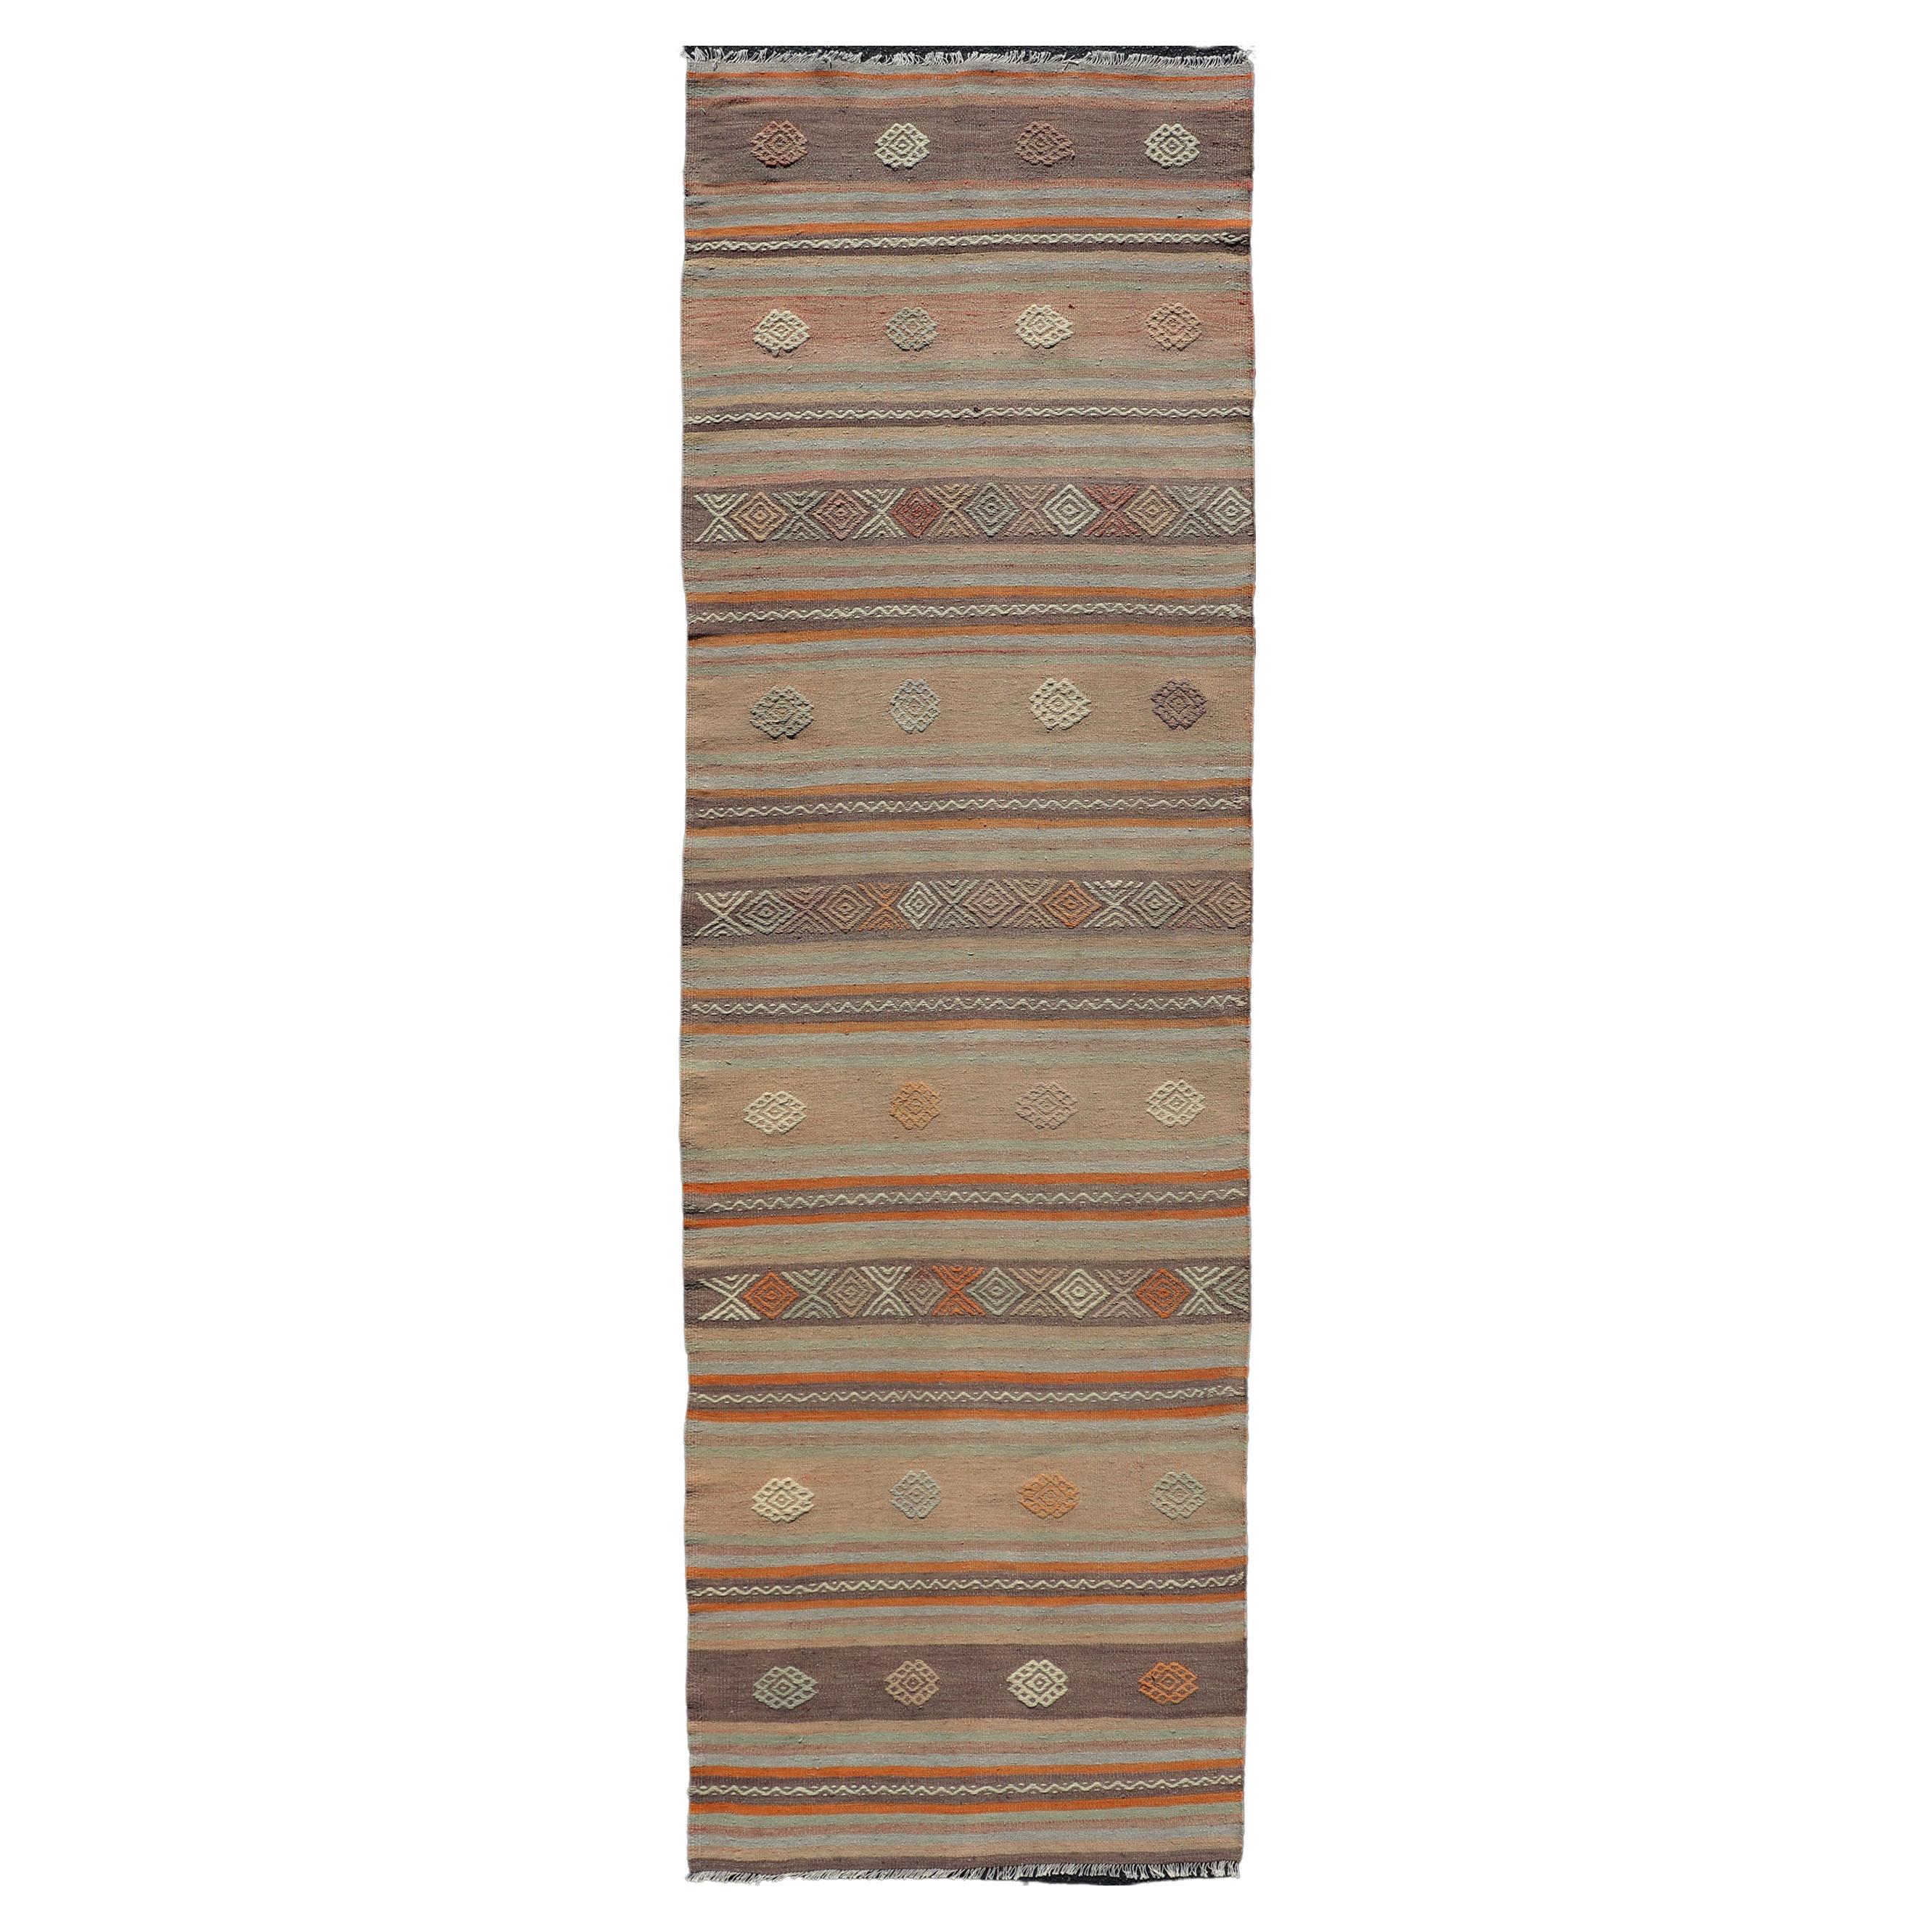 Turkish Vintage Flat-Weave Kilim in Muted Colors with Stripes and Embroideries For Sale